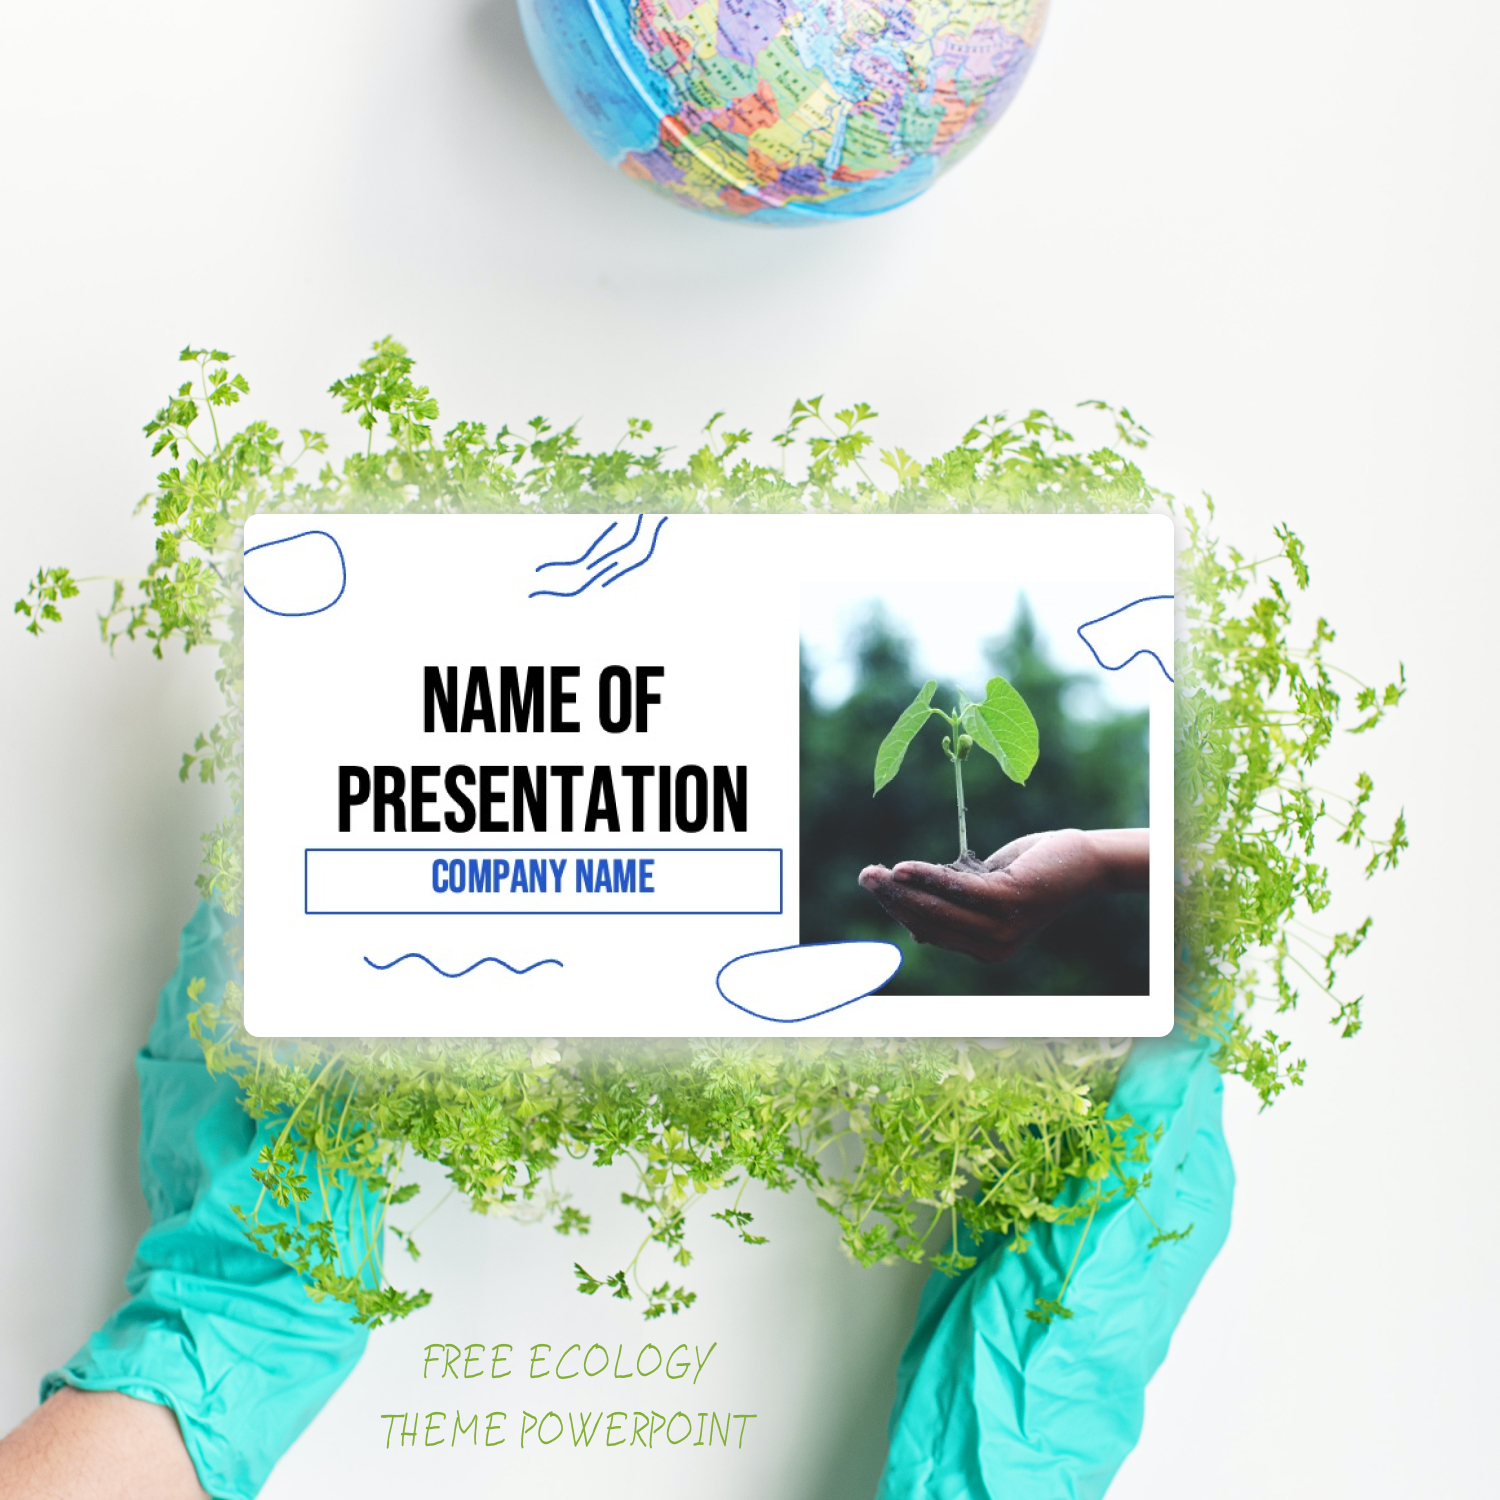 Prints of ecology theme powerpoint.